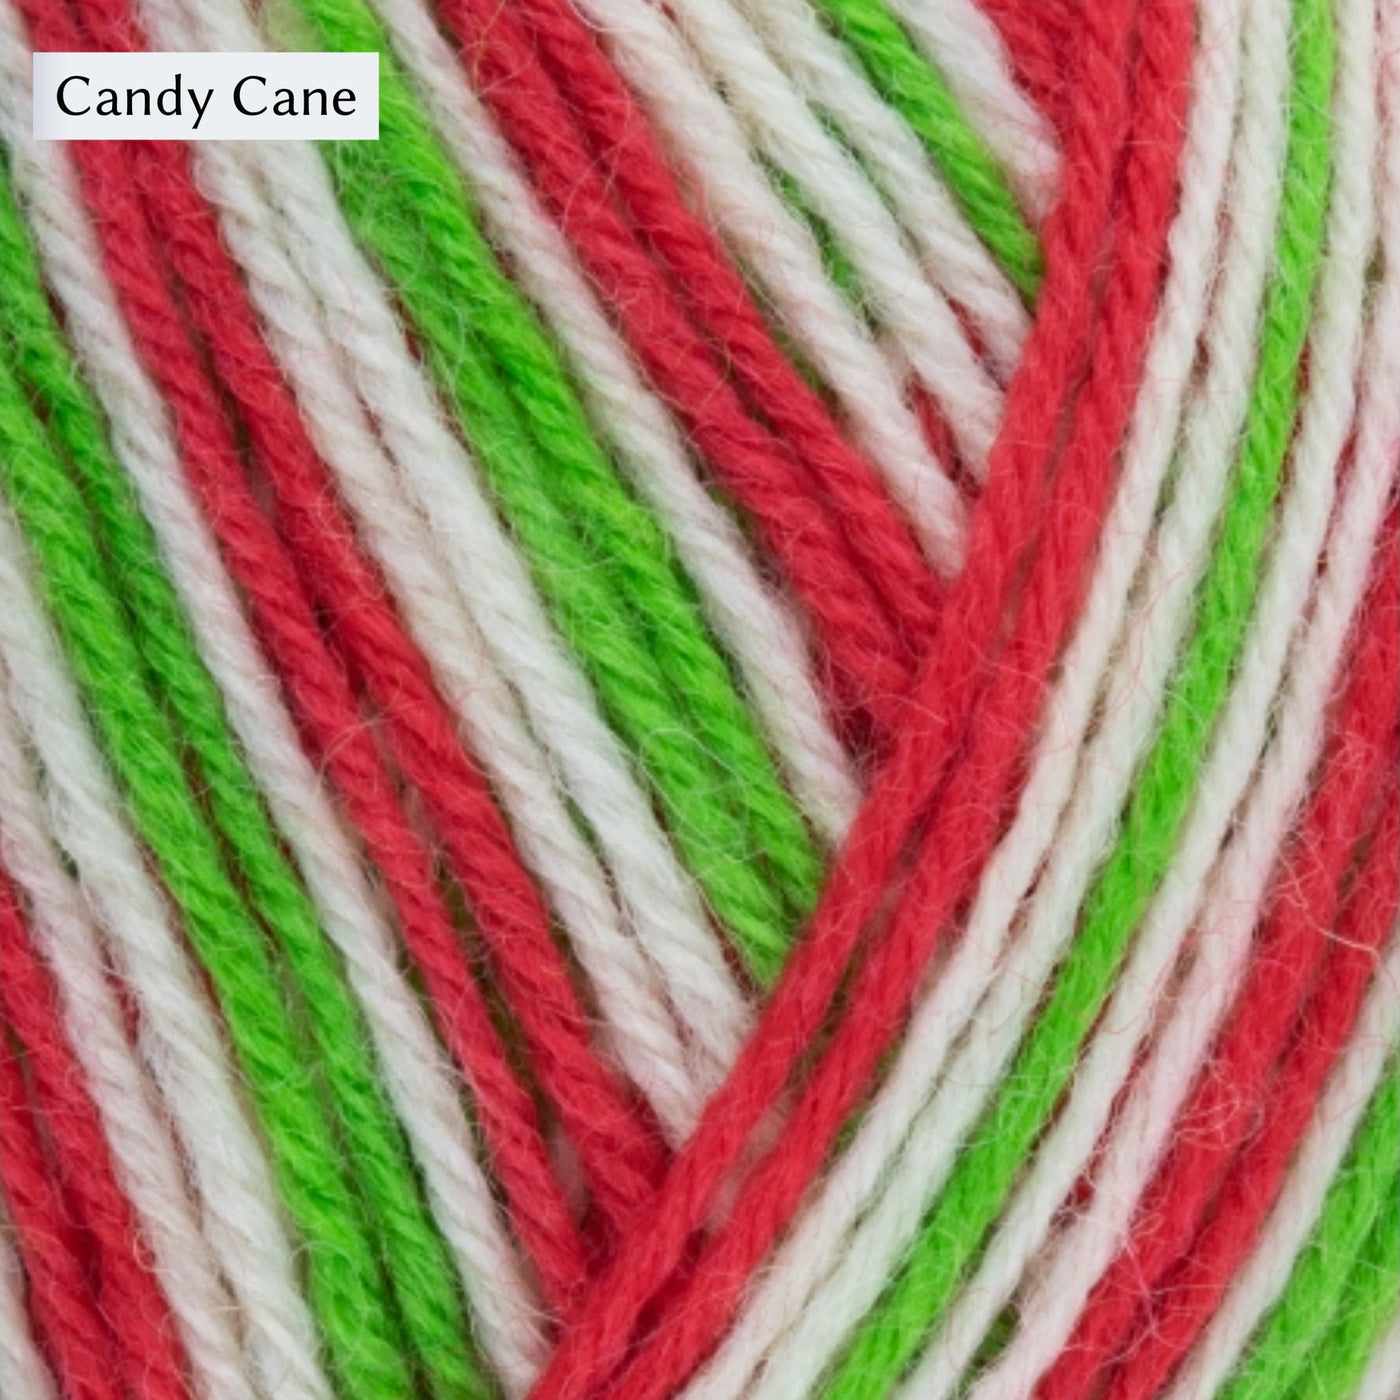 A close-up picture of West Yorkshire Spinners Signature 4ply yarn, fingering weight, in color Candy Cane